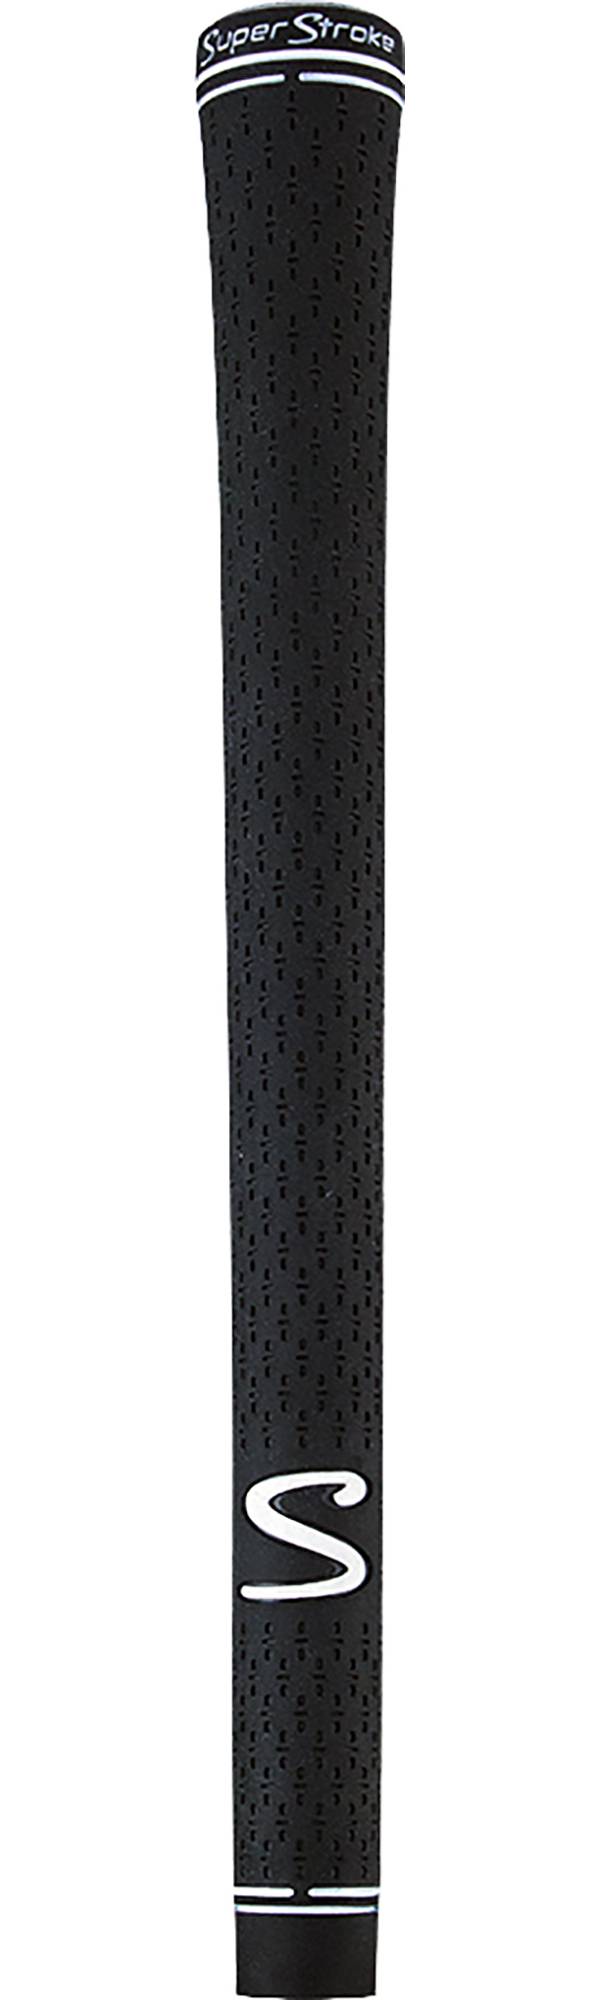 SuperStroke S-Tech Club Grip product image